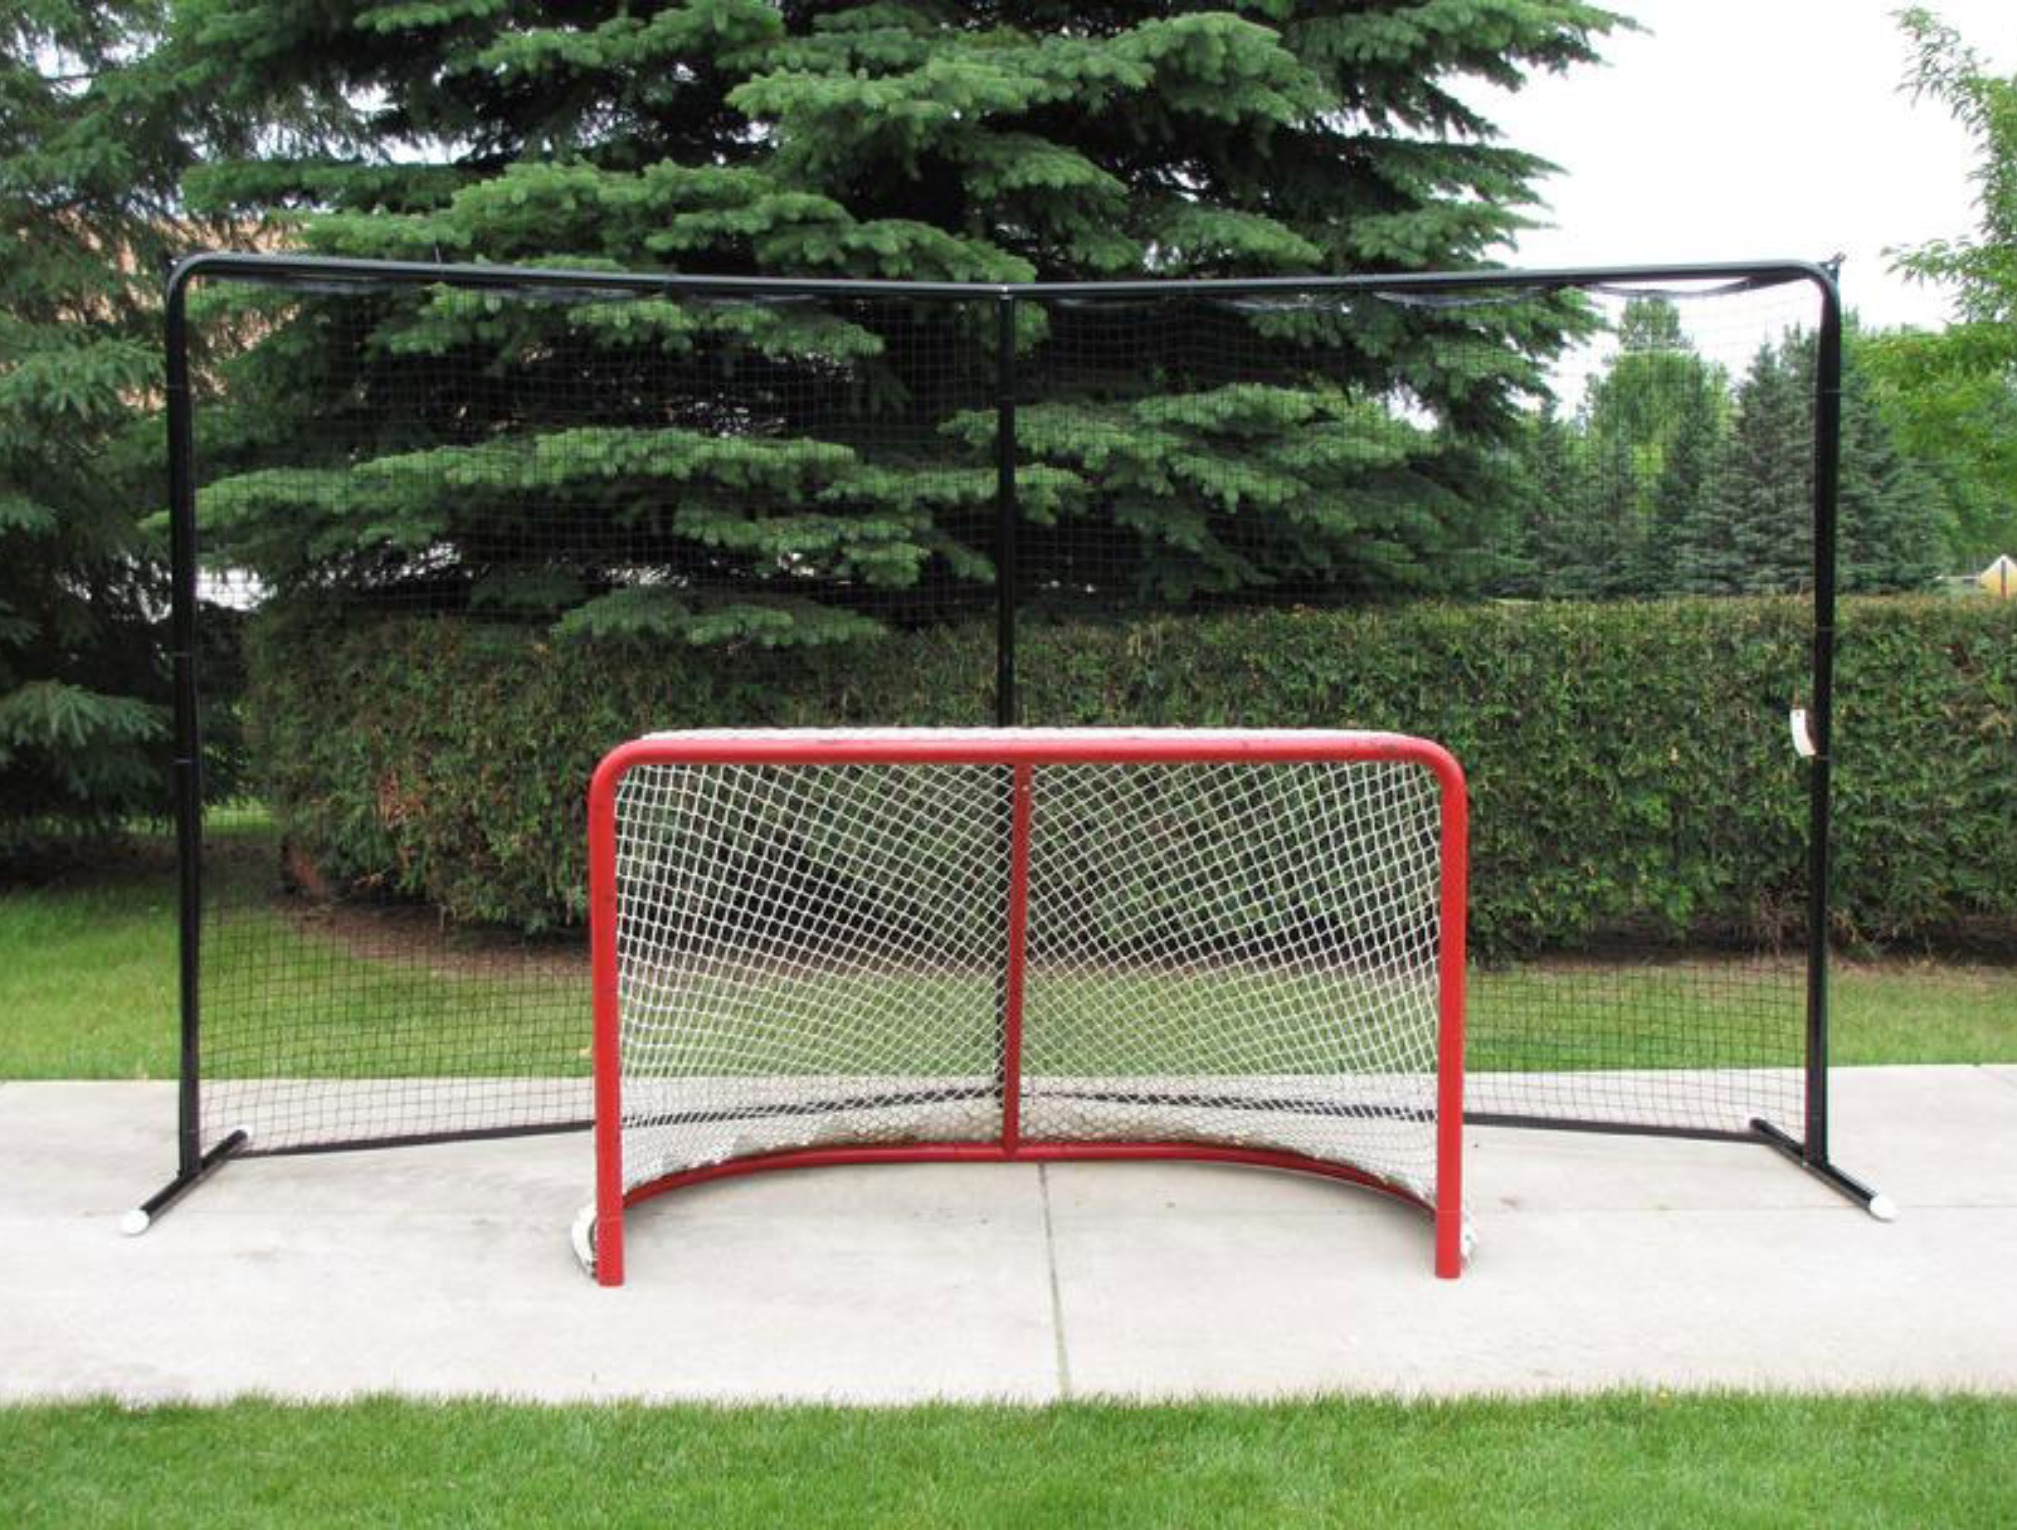 Steel Backstop in 3 Sizes: 3-Pole Angled 14.5x7.5, 2-Pole Straight 14.5 x 7.5, 3-Pole Straight 20’ x 10’; All Backstops with Black Powder-Coated Finish.